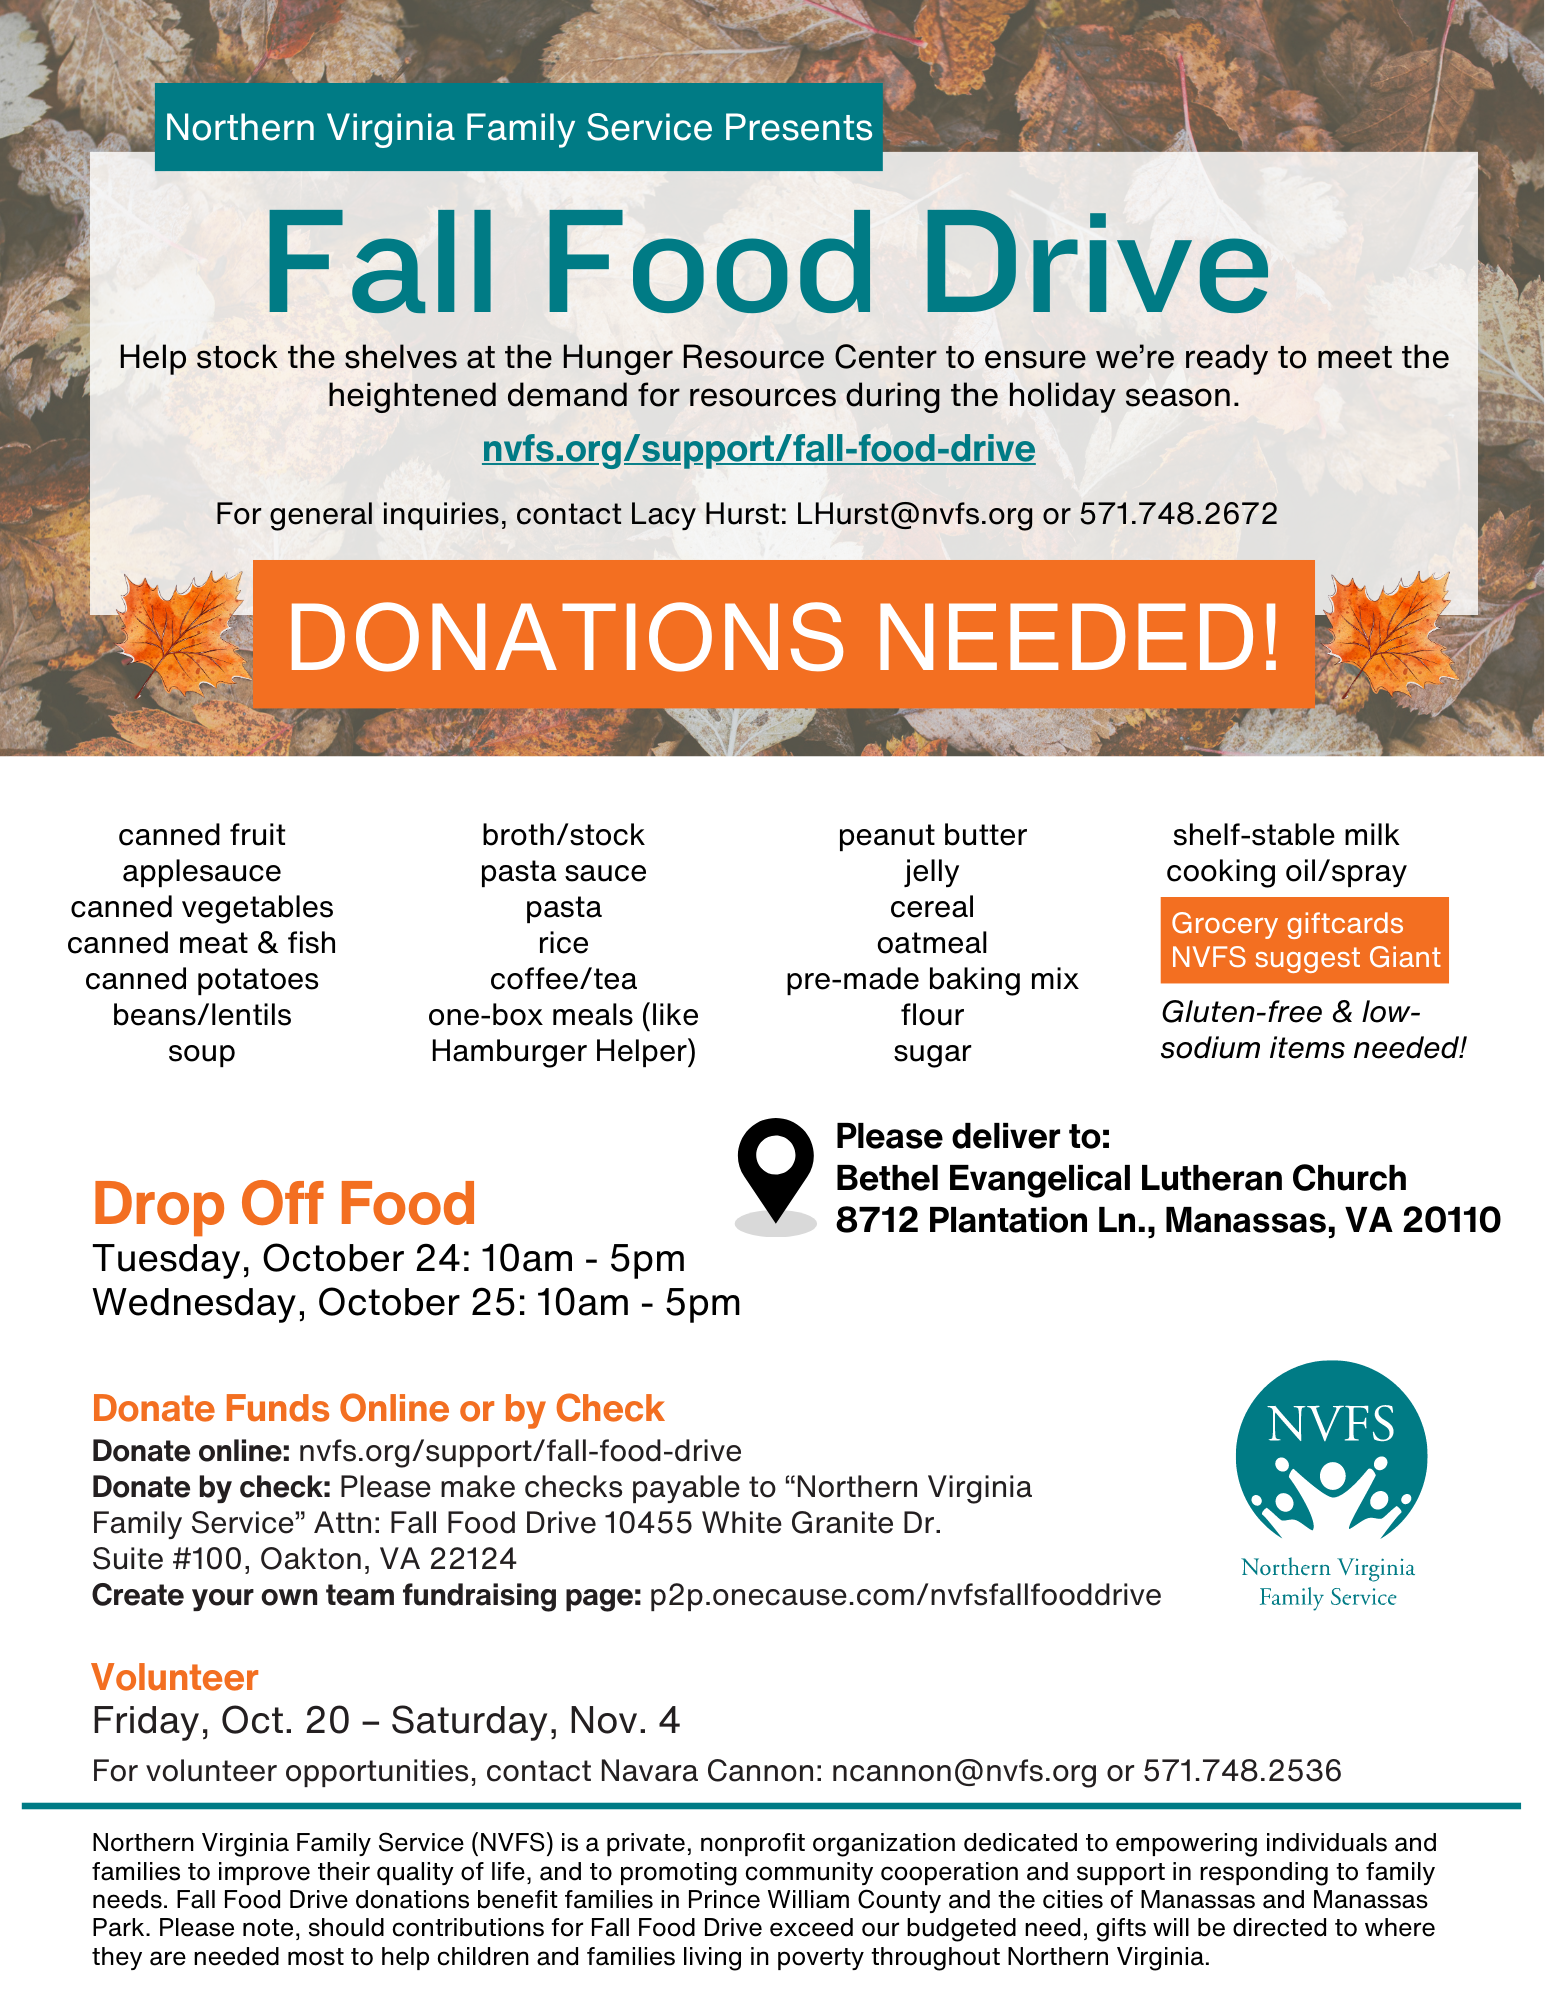 Fall Food Drive - Northern Virginia Family Service